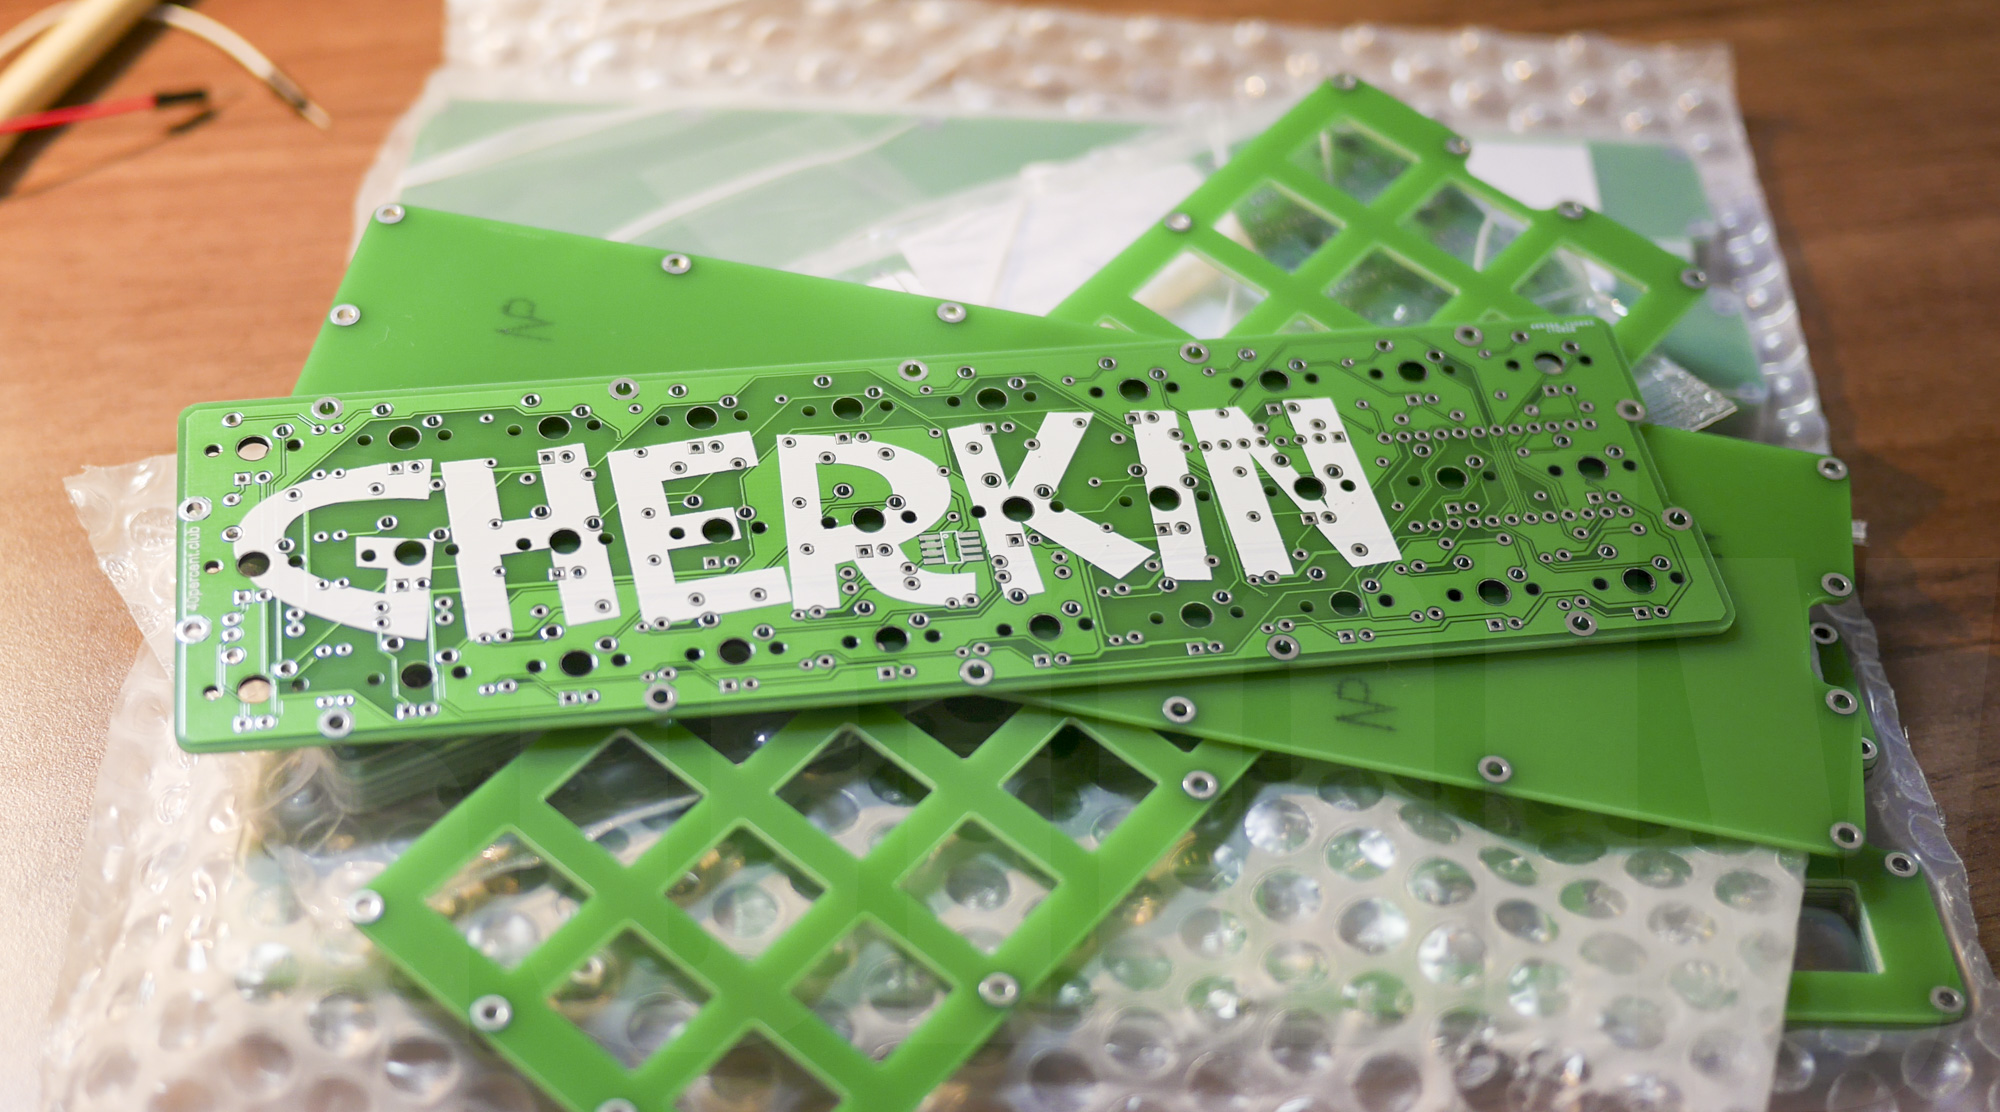 Gherkin PCB unboxing